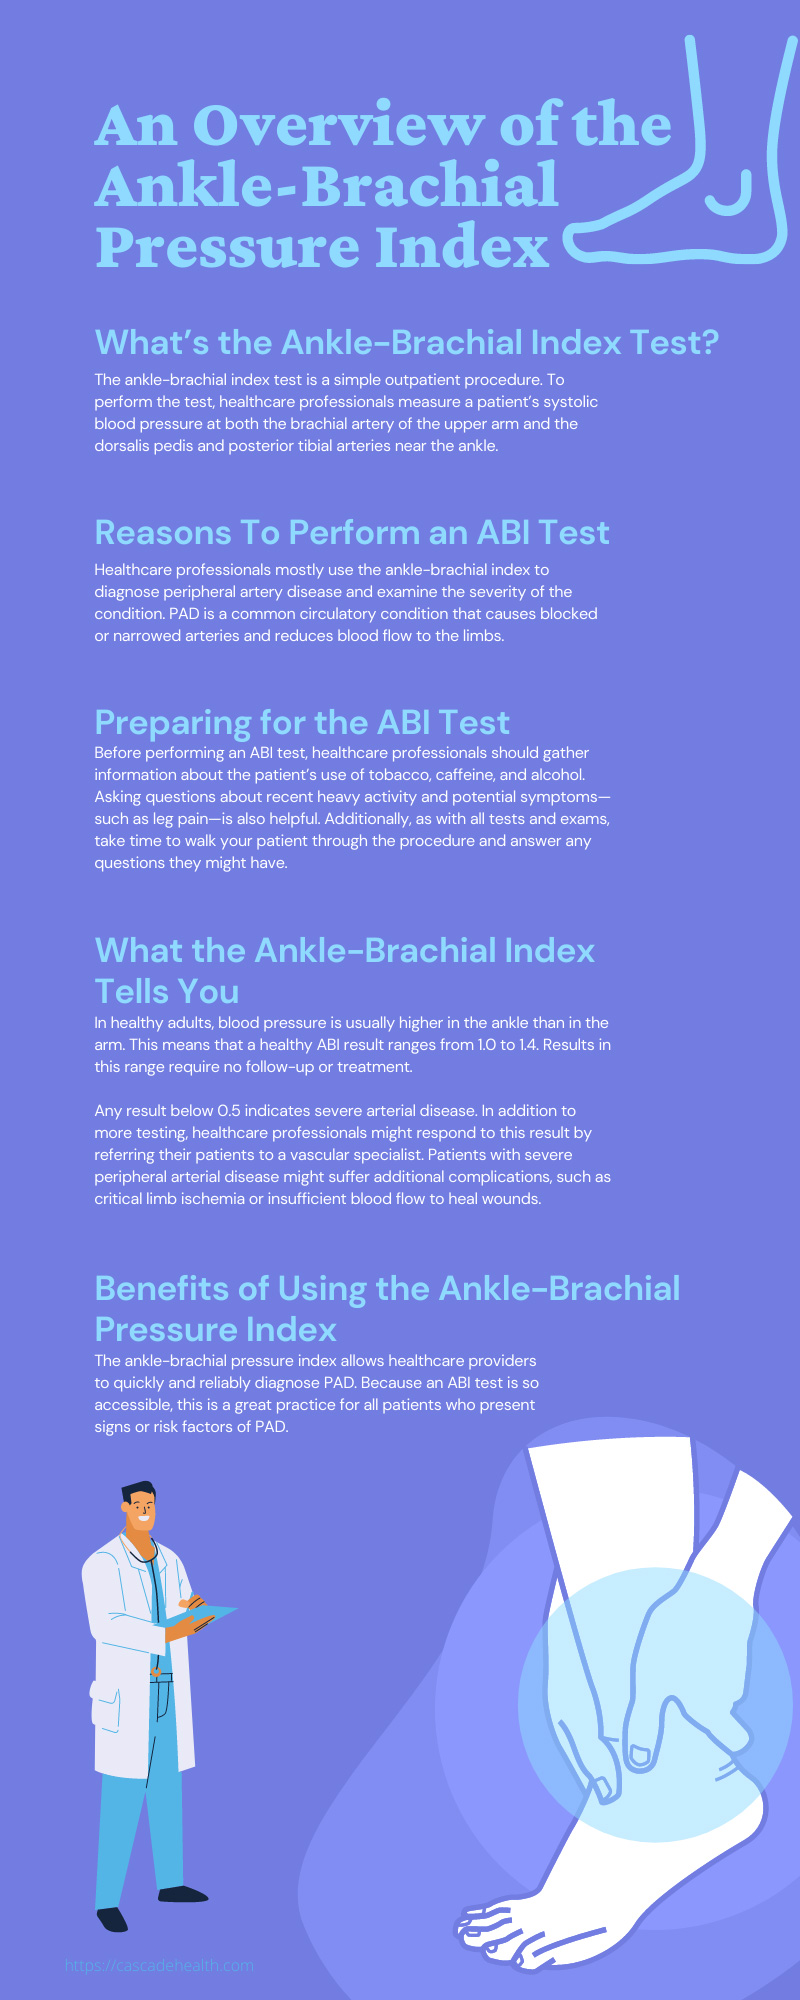 An Overview of the Ankle-Brachial Pressure Index